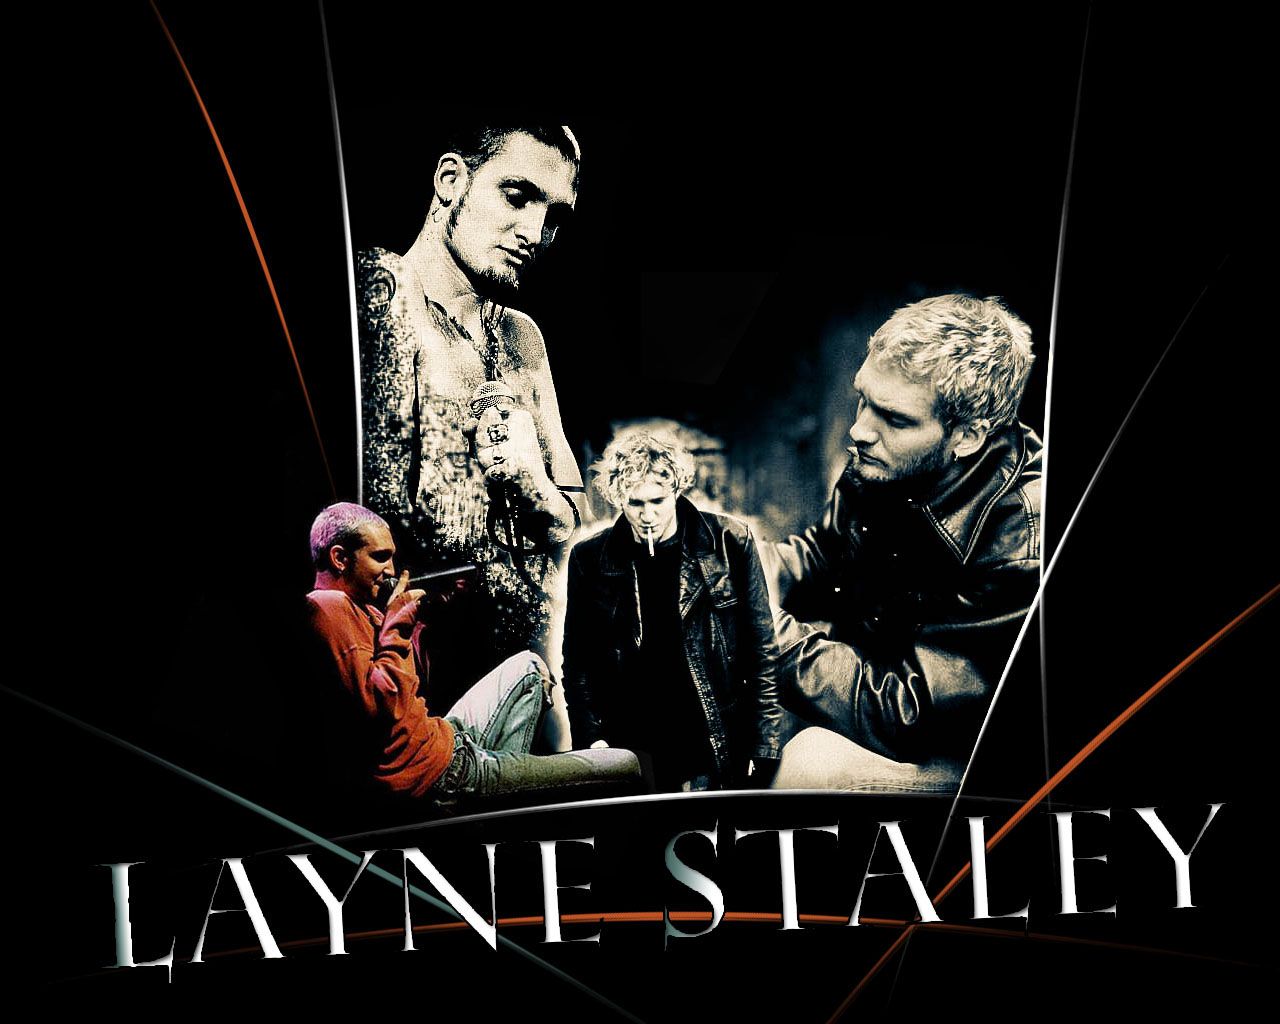 Free download Layne Staley by blue blue blue [1280x1024] for your Desktop, Mobile & Tablet. Explore Layne Staley Wallpaper. Layne Staley Wallpaper